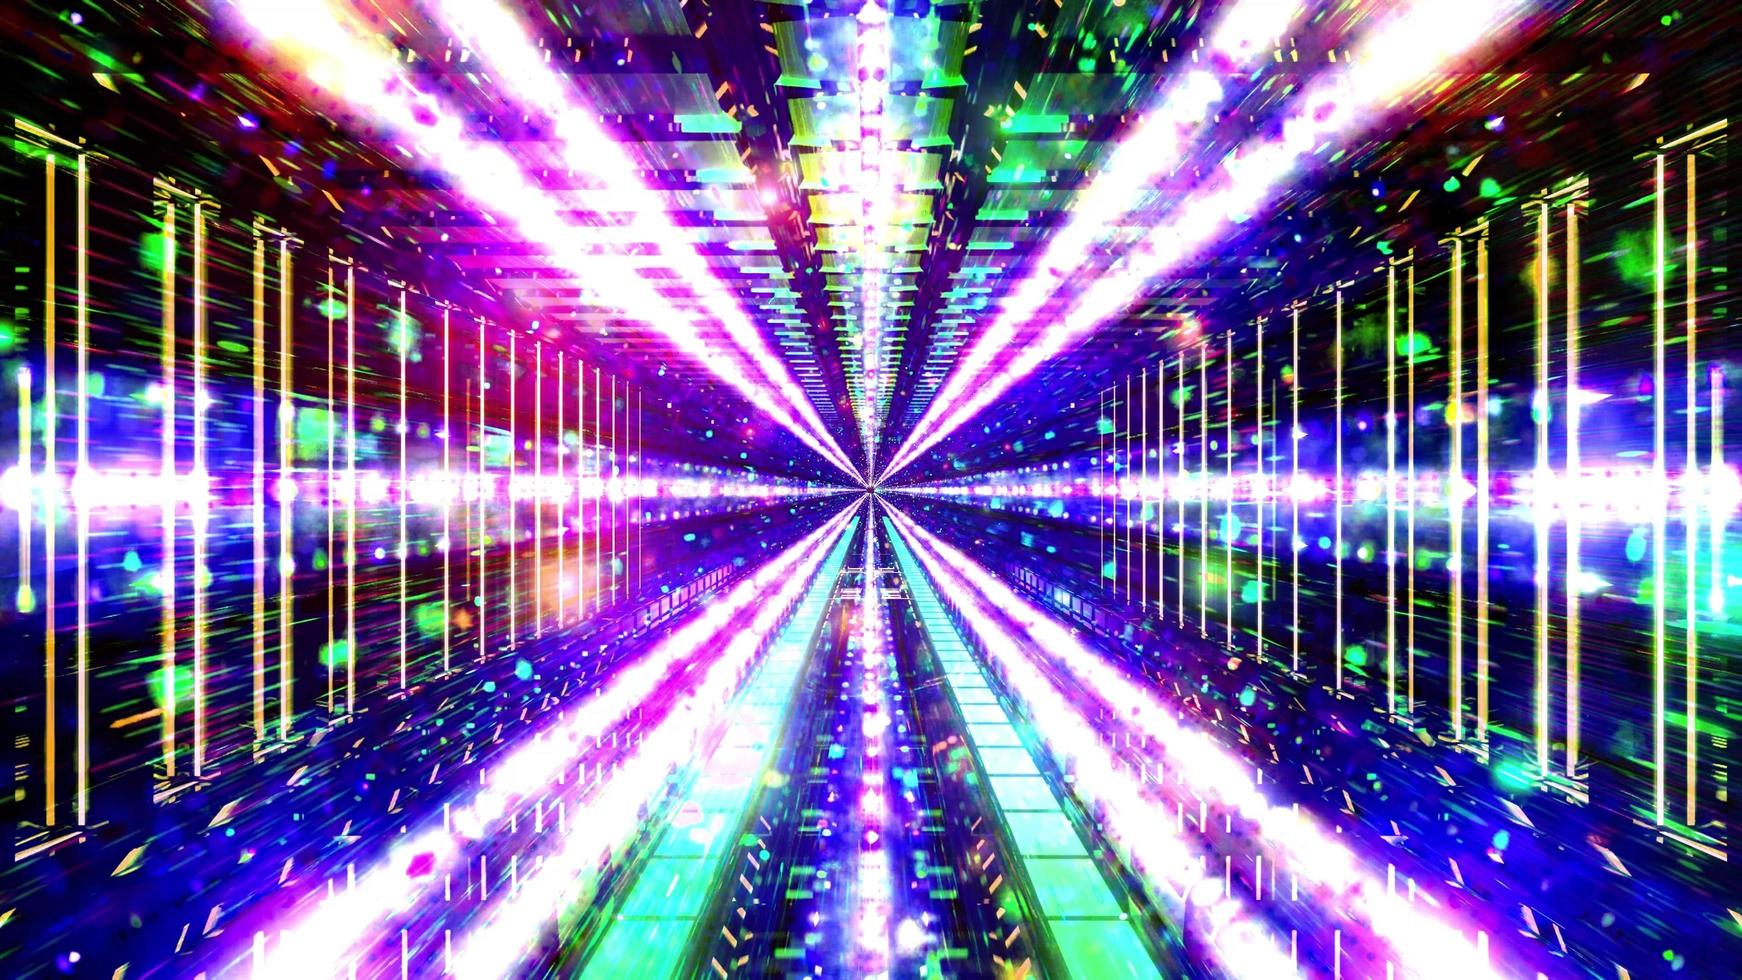 Glowing sci-fi space tunnel particles 3d illustration background wallpaper design artwork photo